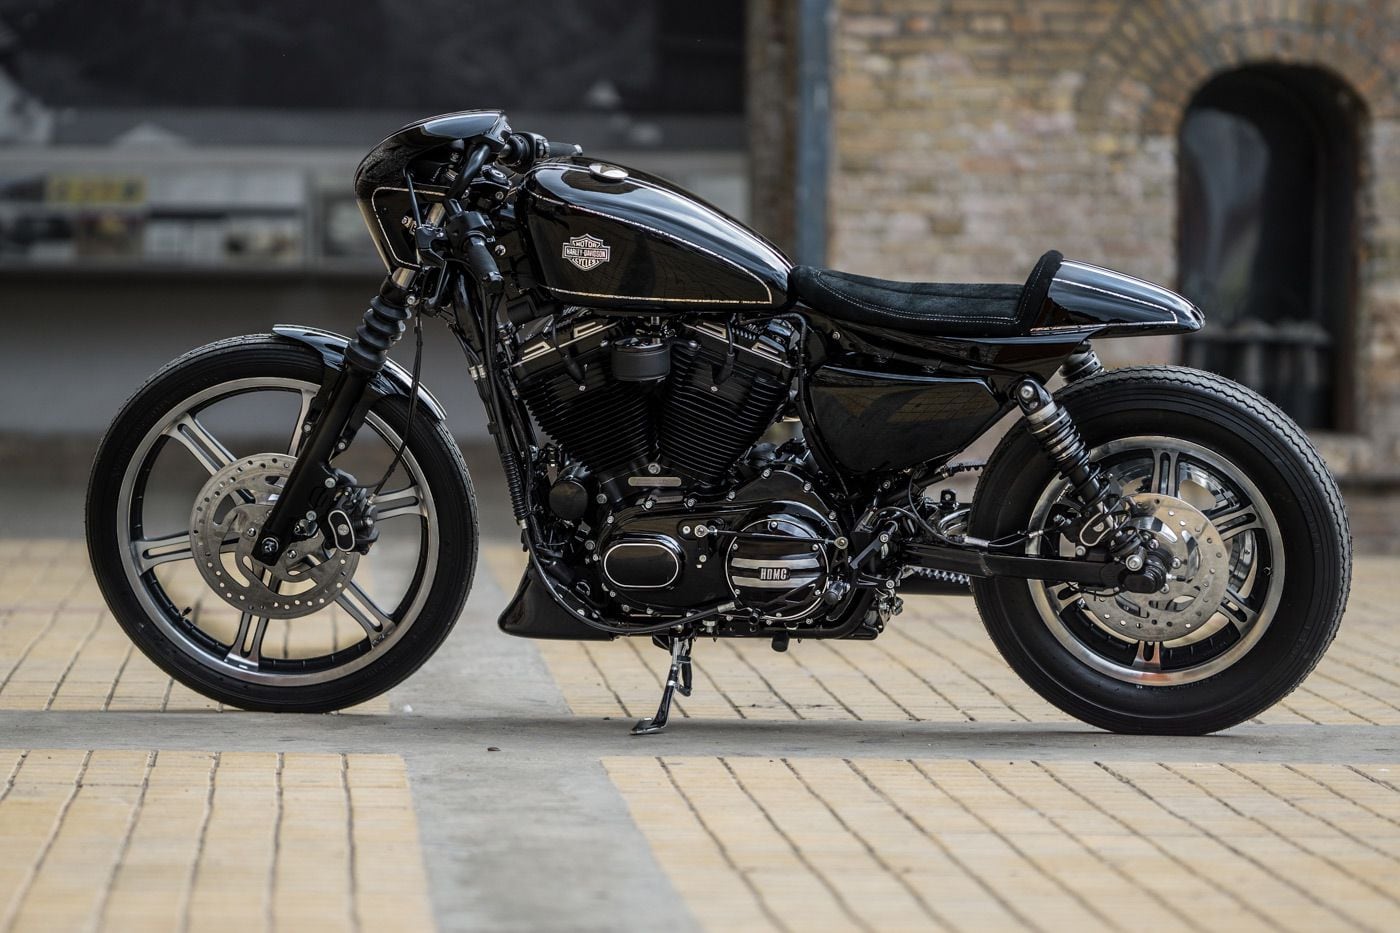 Here’s where things get confusing: In 2015, European dealers also had a custom build-off, but called it Battle of the Kings. The winner in the 2016 contest was Harley-Davidson Athens with its Nyx café racer, inspired by the Greek goddess of the night. Two hundred eleven dealers from across Europe, Middle East, and Africa (EMEA) entered their version of a customized Sportster Iron 883.